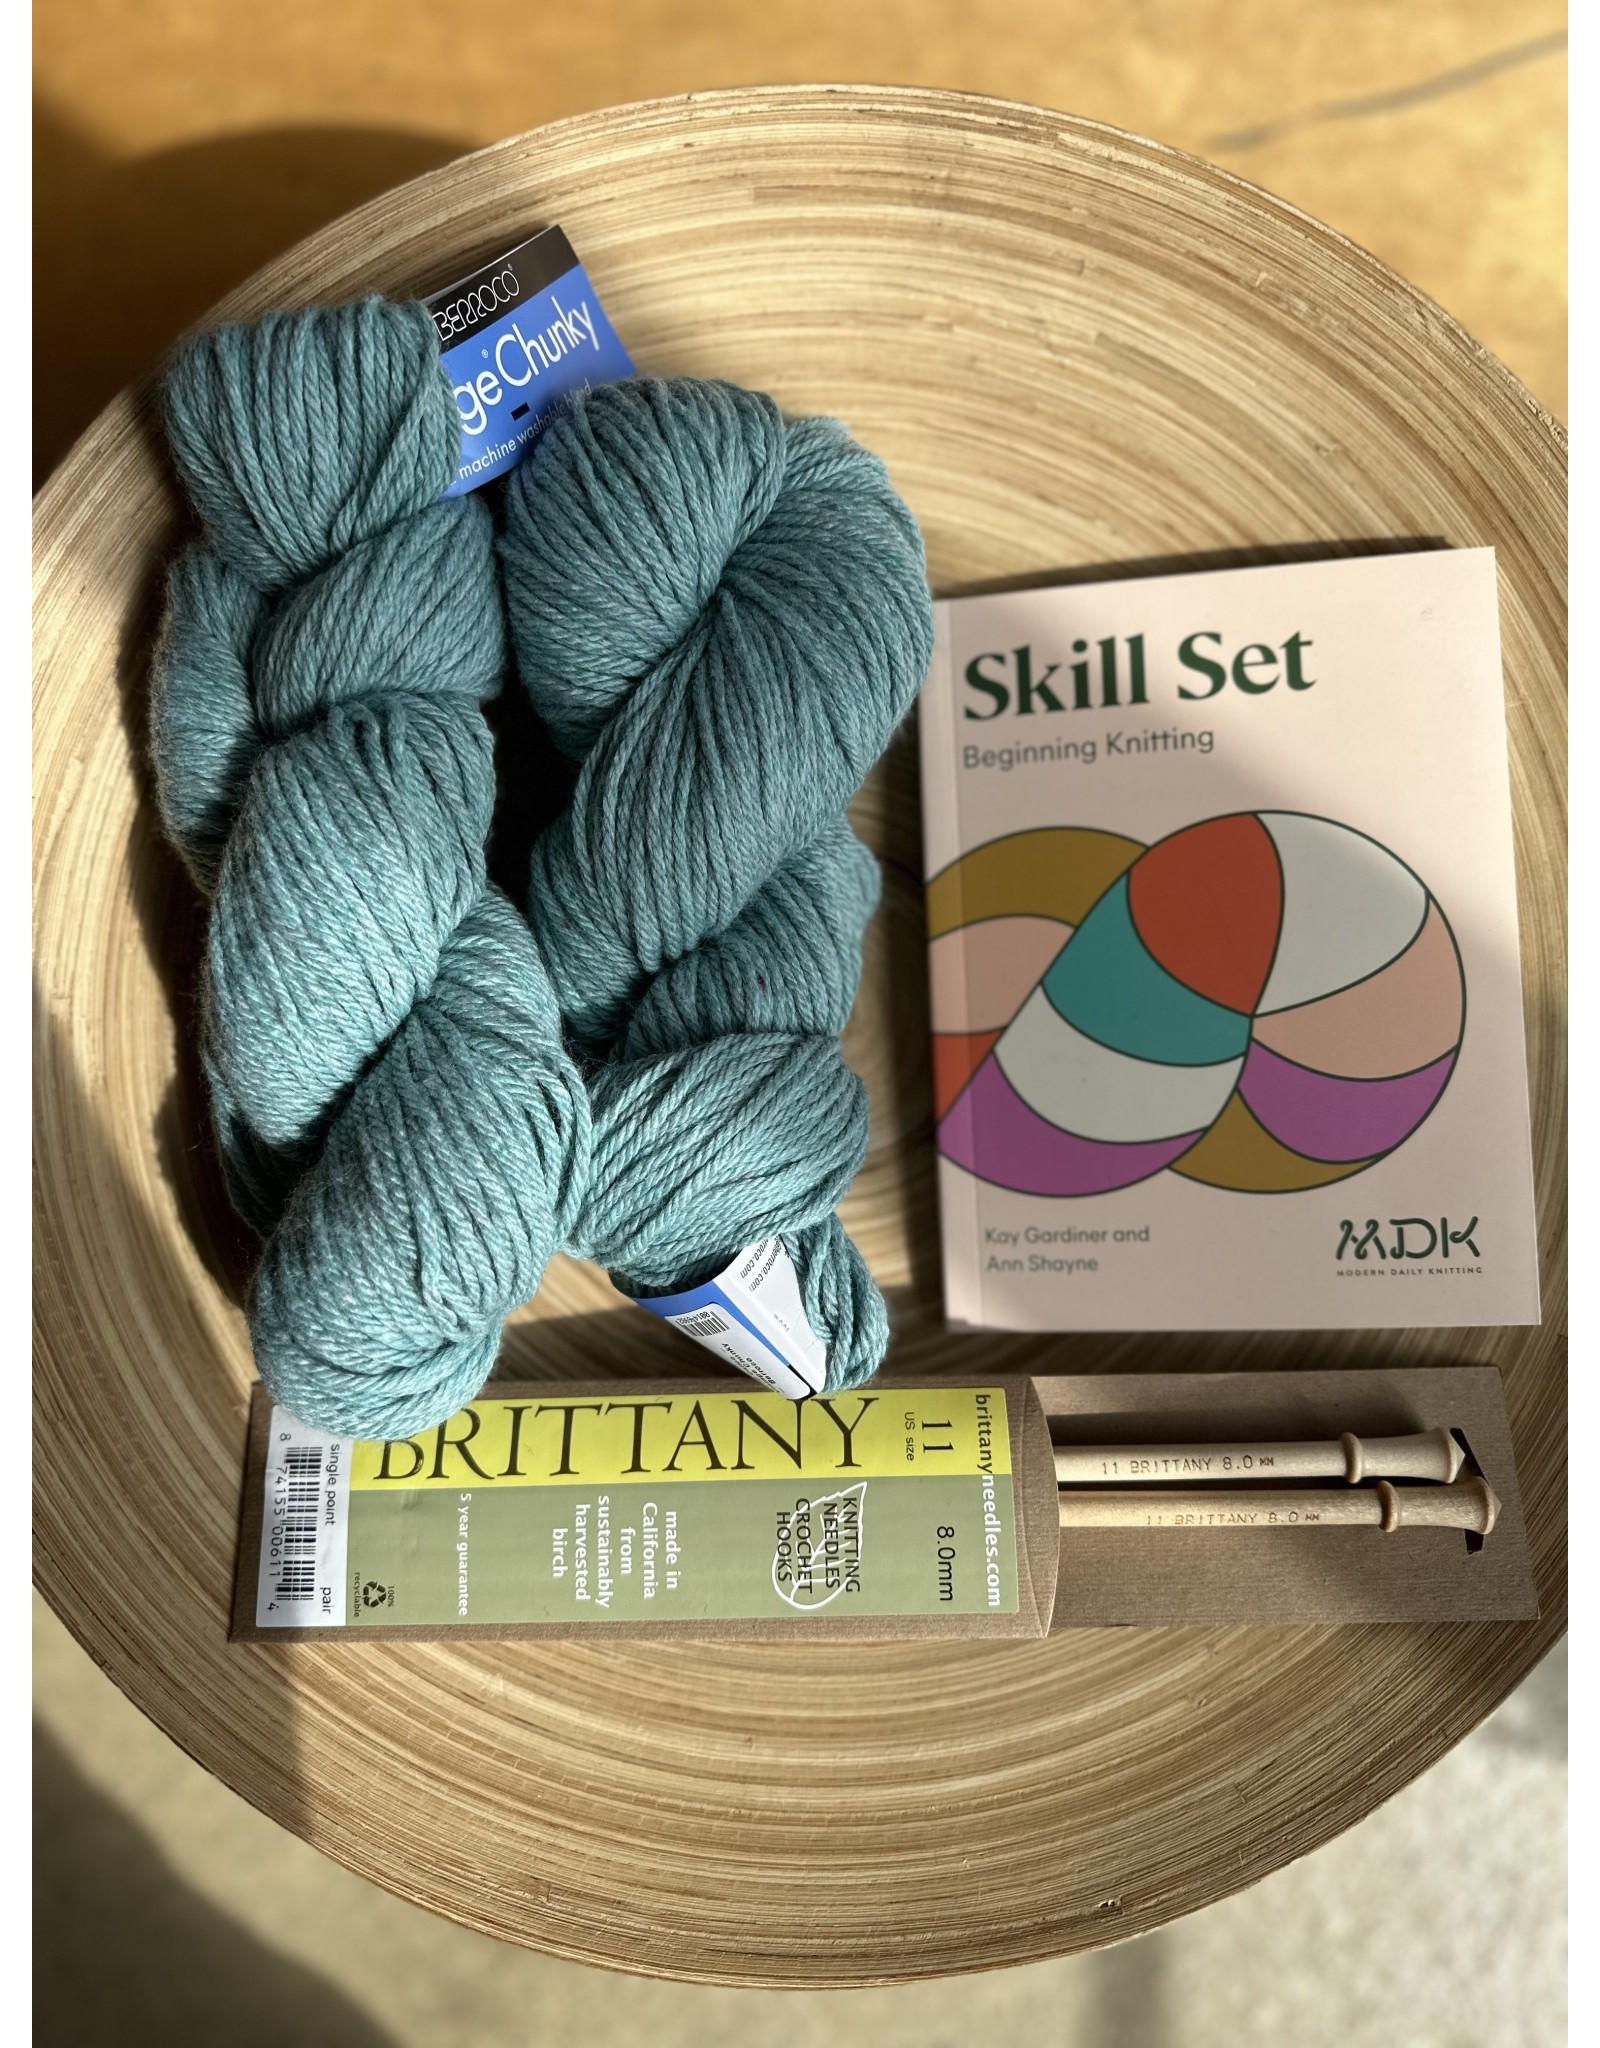 Learn to Knit Kit - Calico